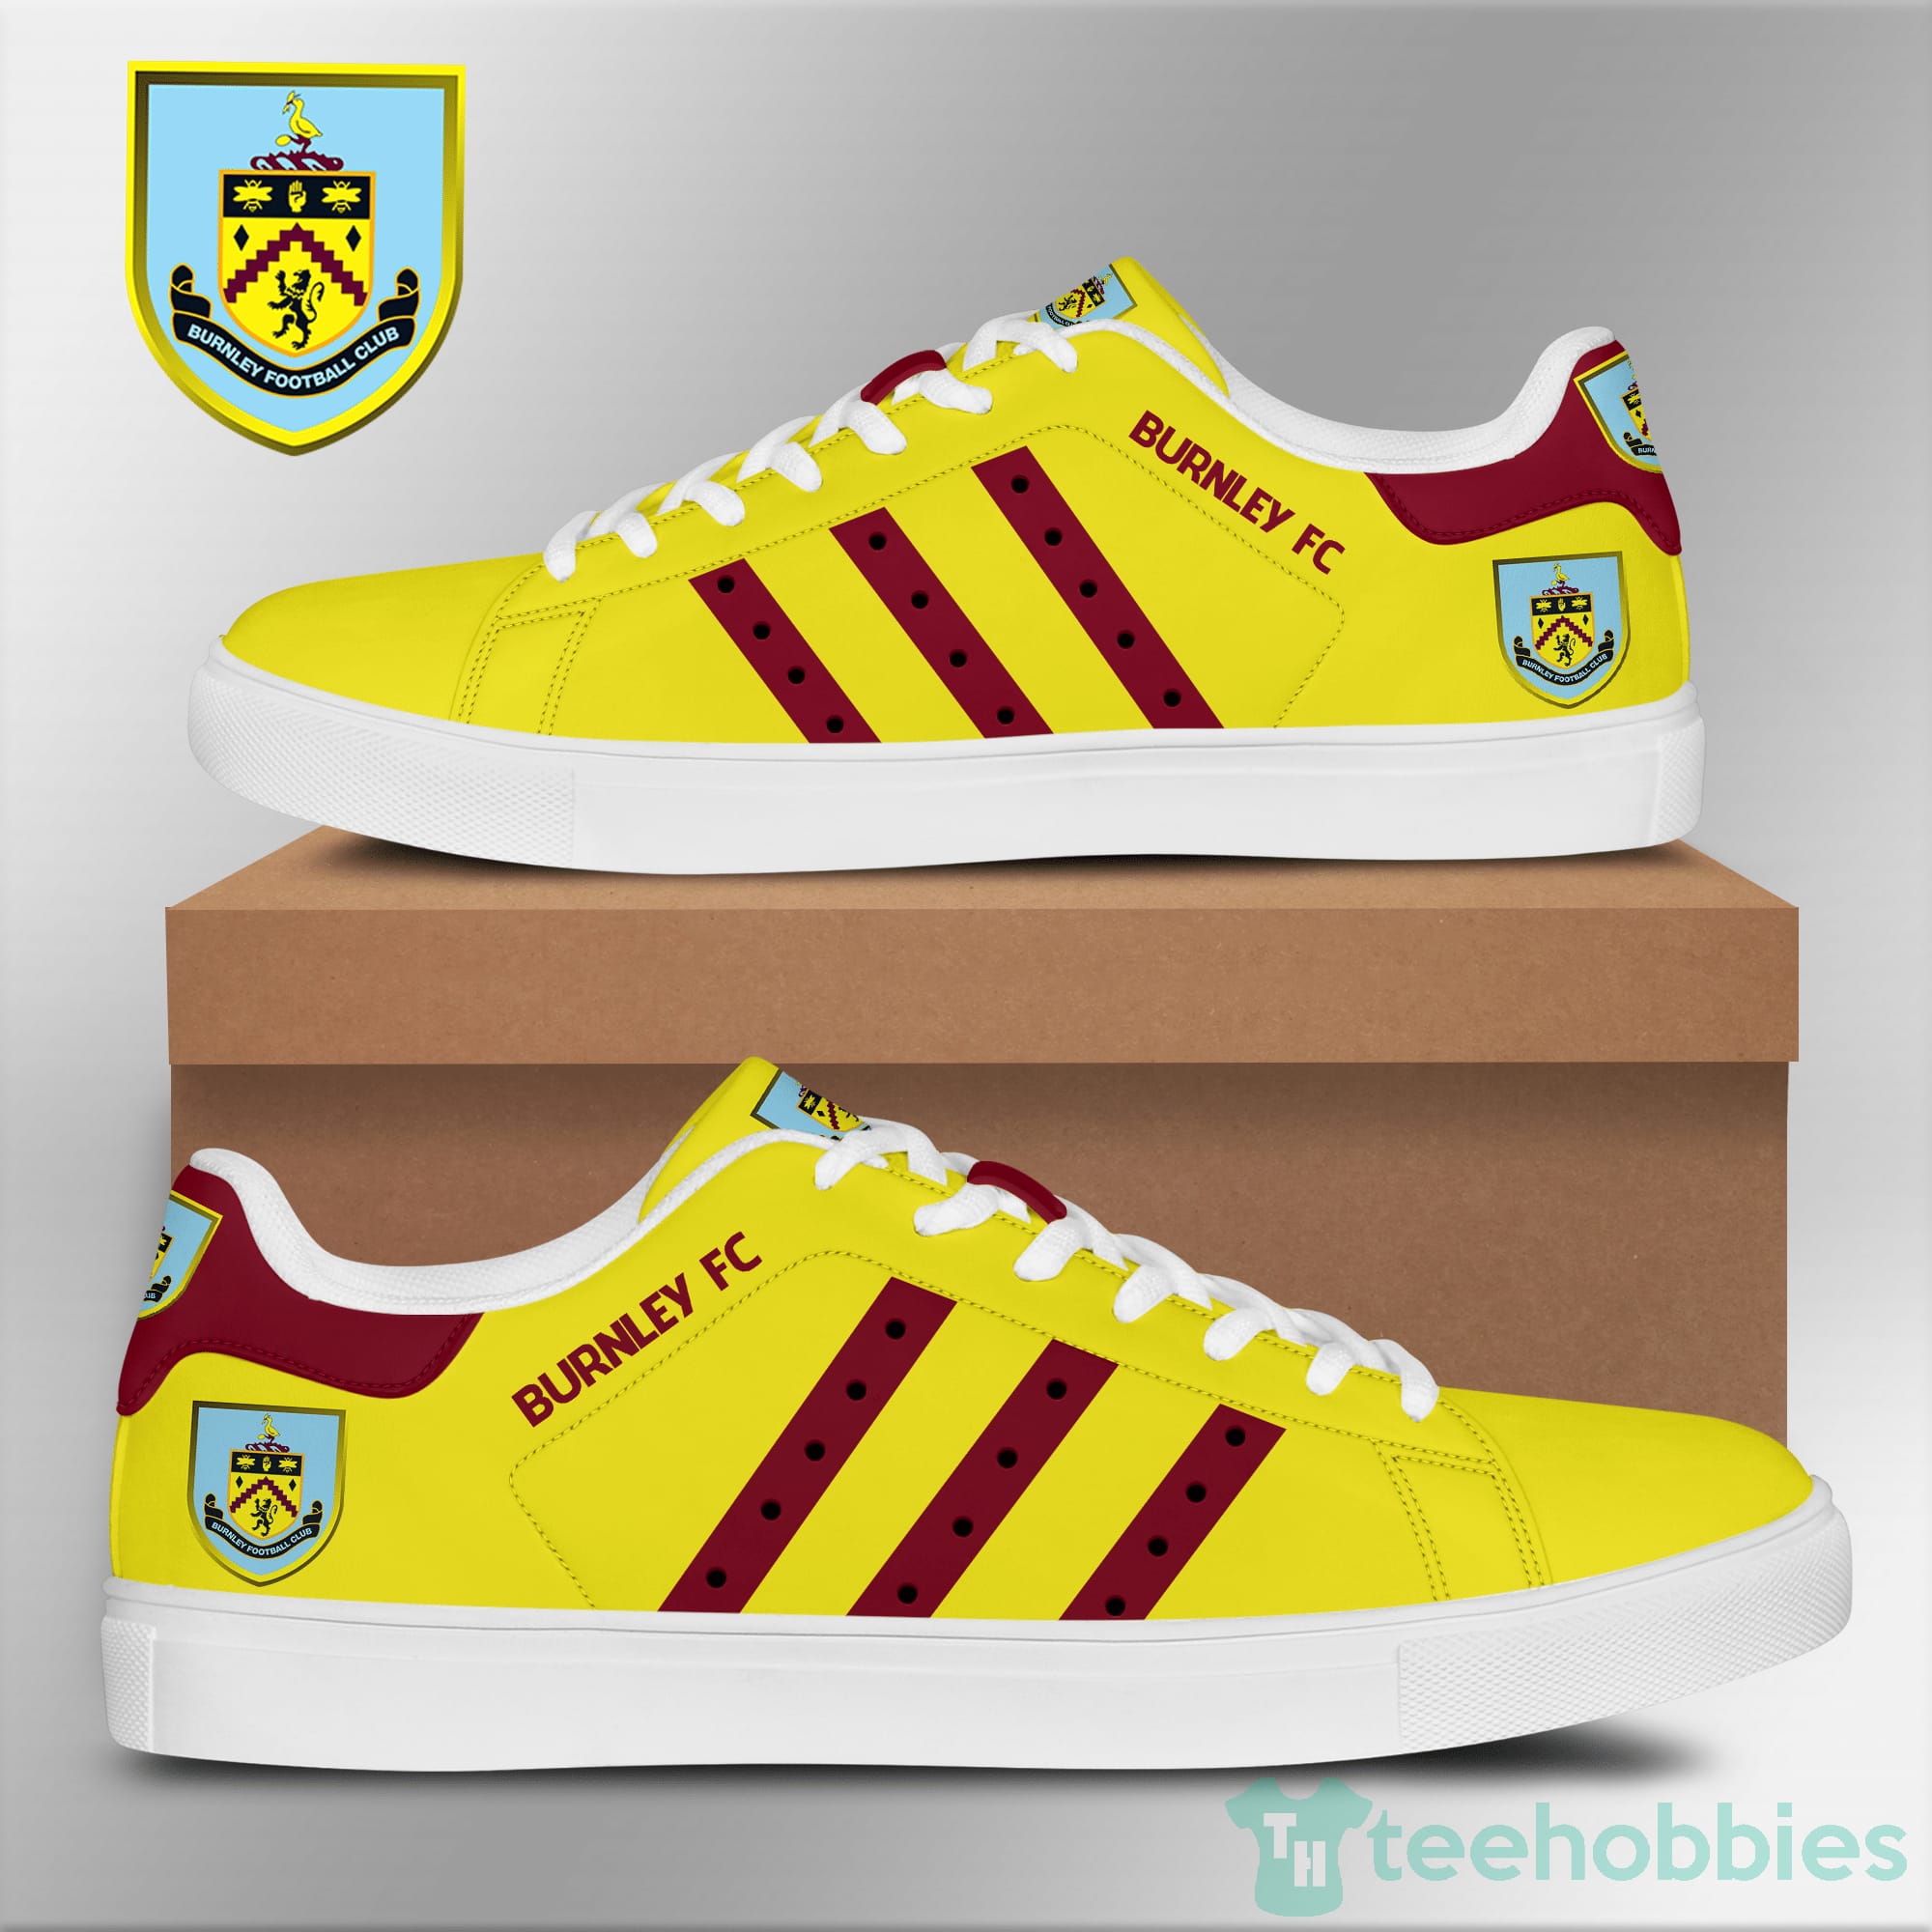 Burnley F.C Yellow Low Top Skate Shoes Product photo 1